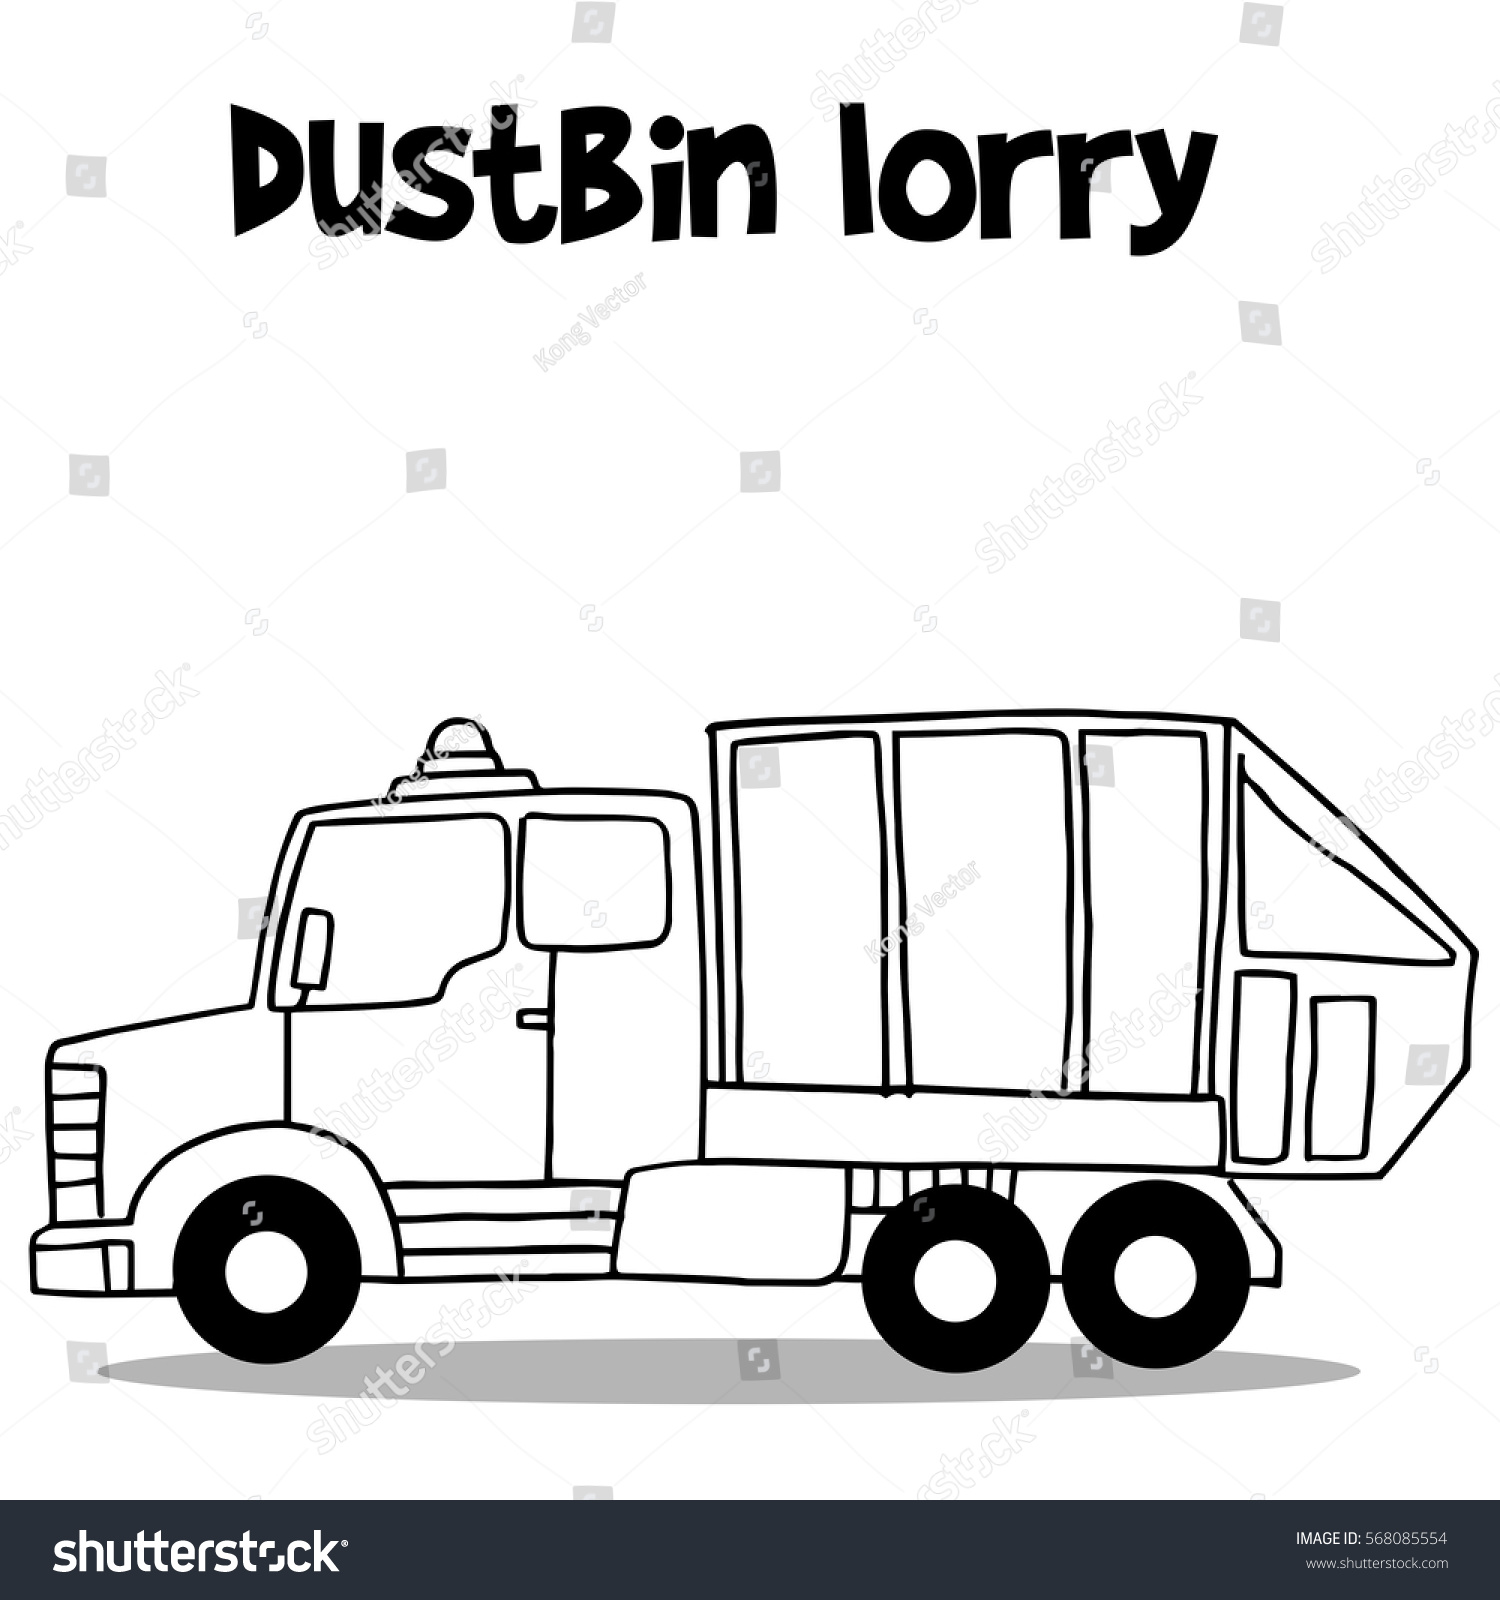 SVG of Dustbin lorry of transportation collection vector art svg